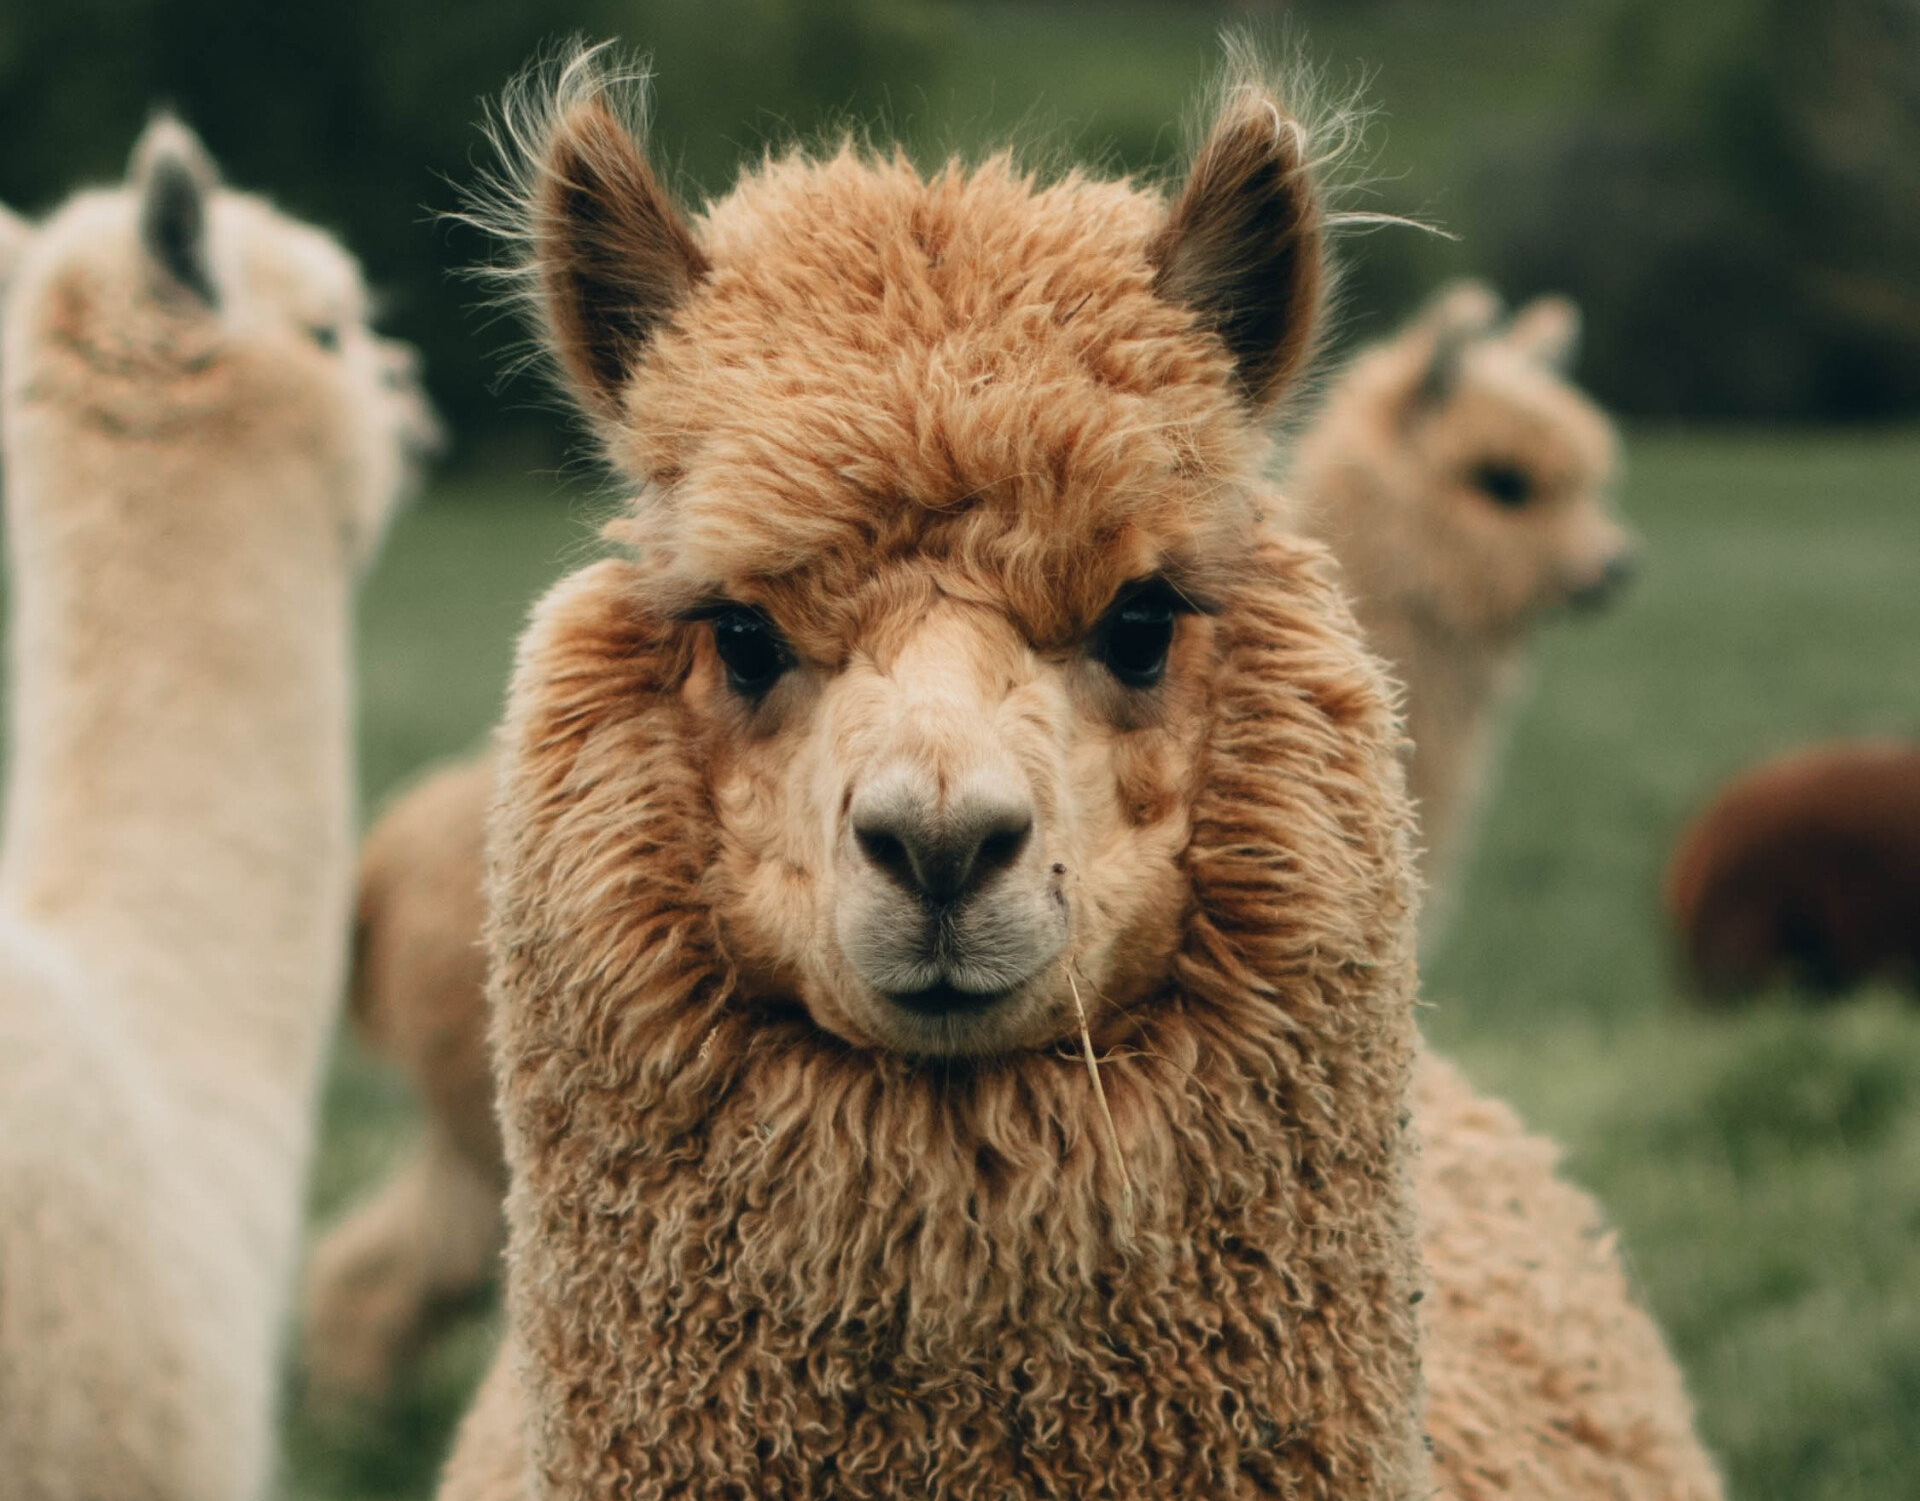 A group of alpacas are standing in a field looking at the camera.